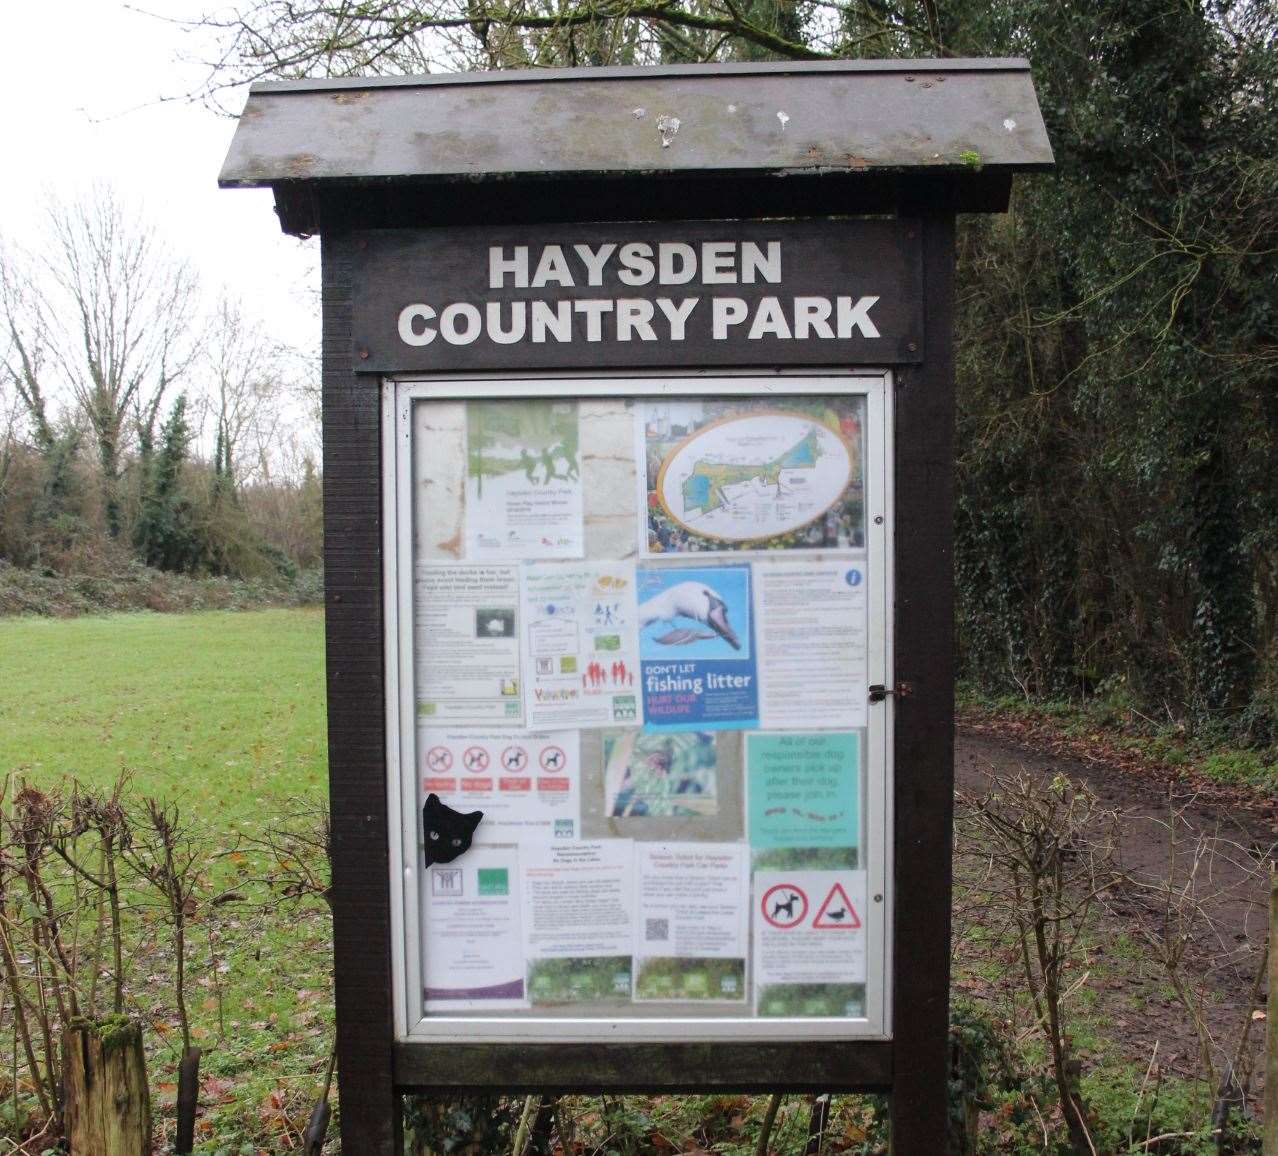 Season tickets for Haysden Country Park will cost more